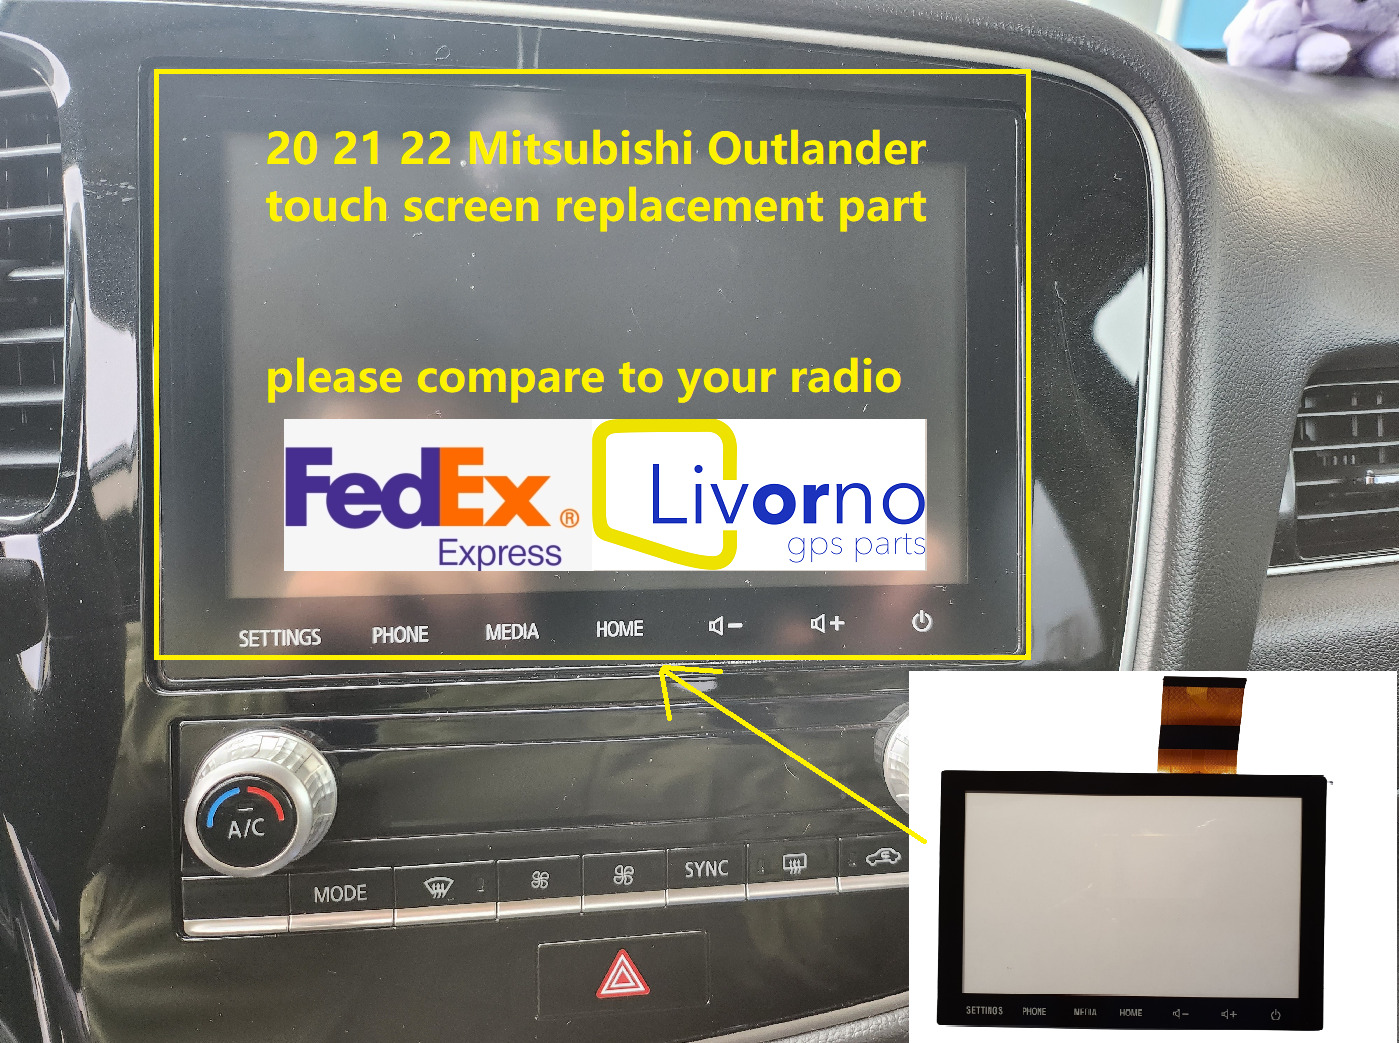 19 20 21 22 Mitsubishi Outlander TOUCH SCREEN REPLACEMENT glass Digitizer RADIO